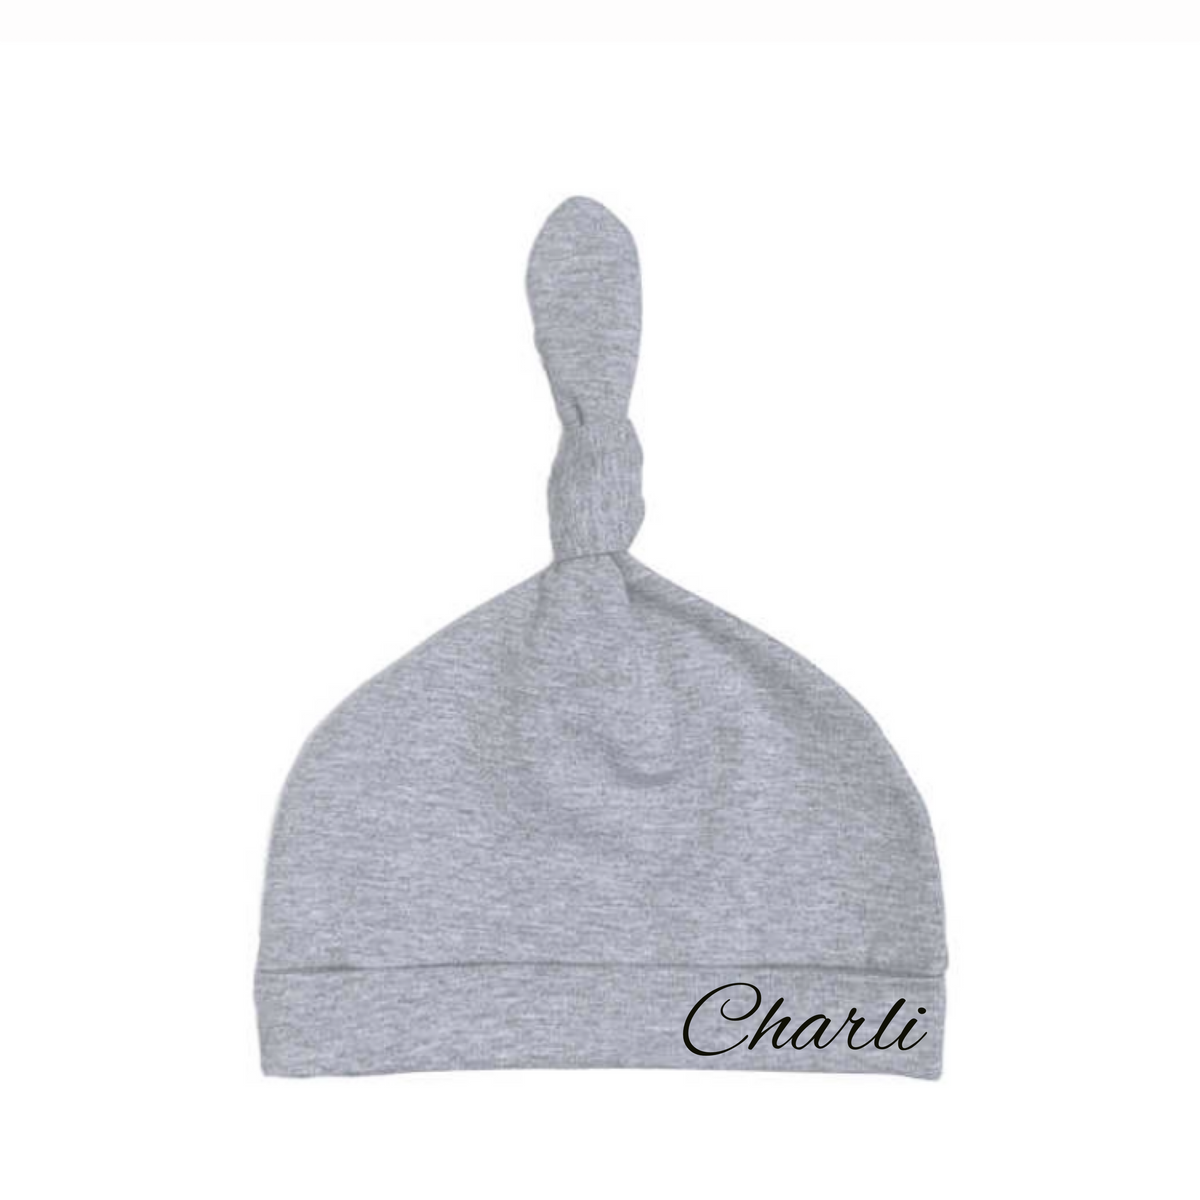 MLW By Design - Personalised Knotted Beanie | Grey with Black Print *LIMITED EDITION*